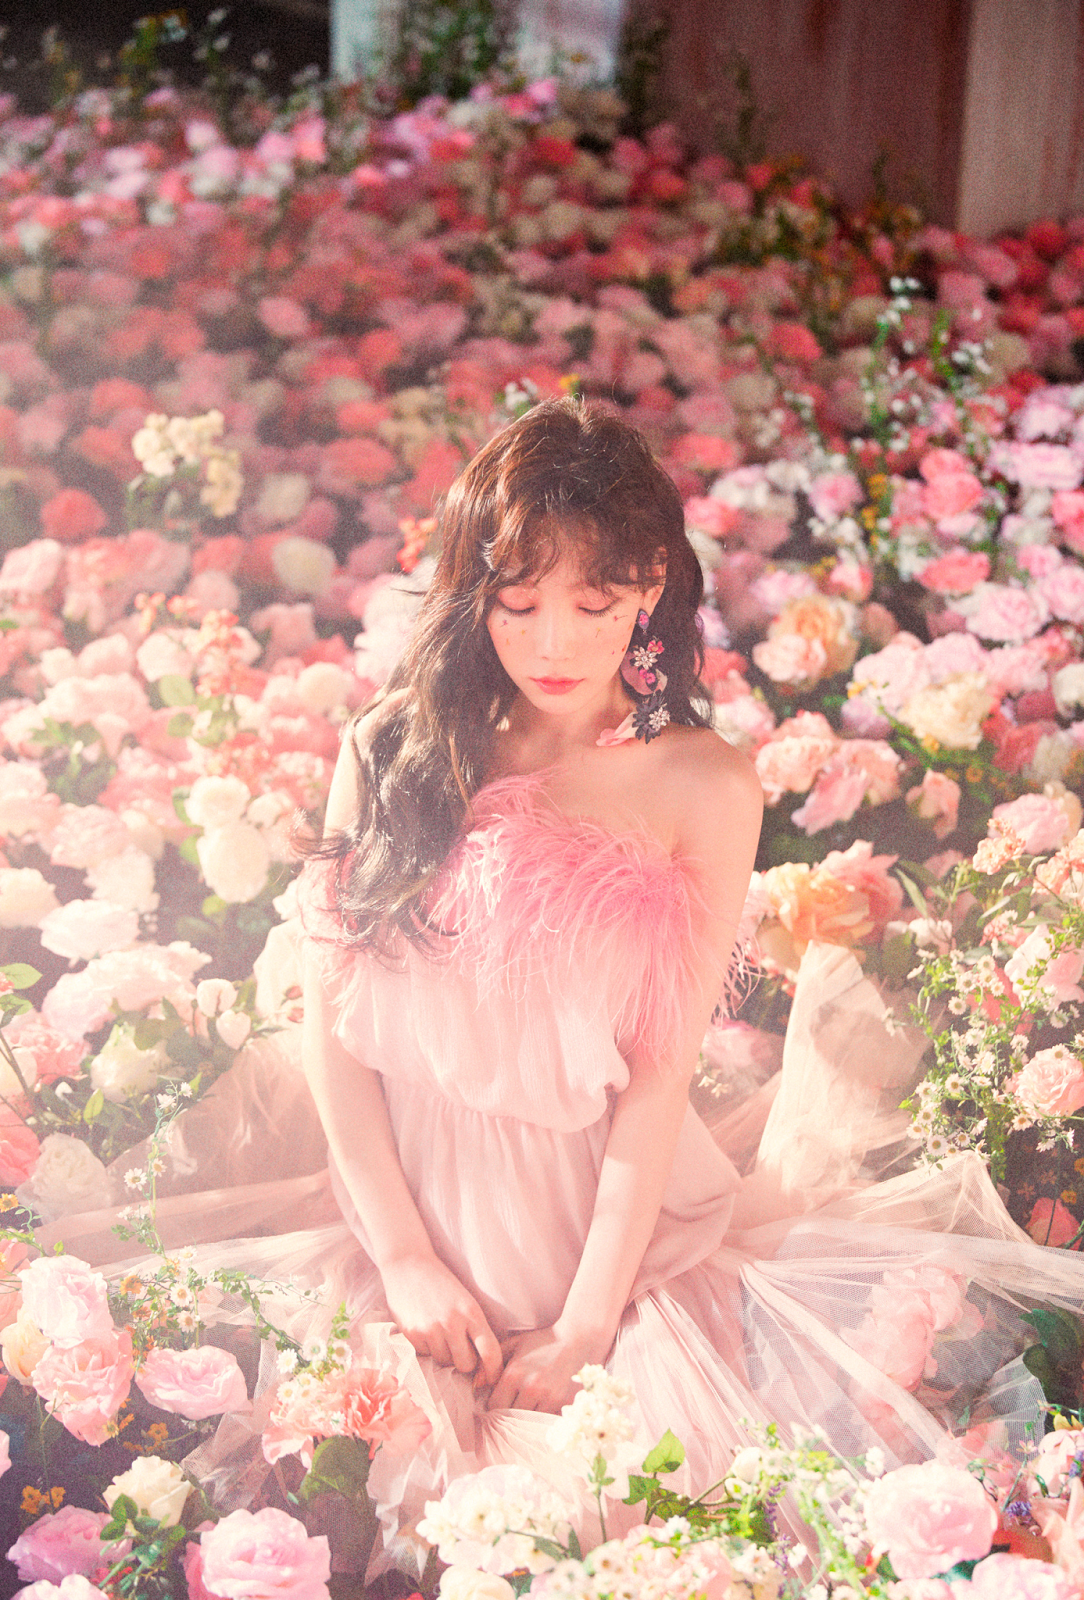 Taeyeon The 1st Album [my Voice Deluxe Edition ] Digital